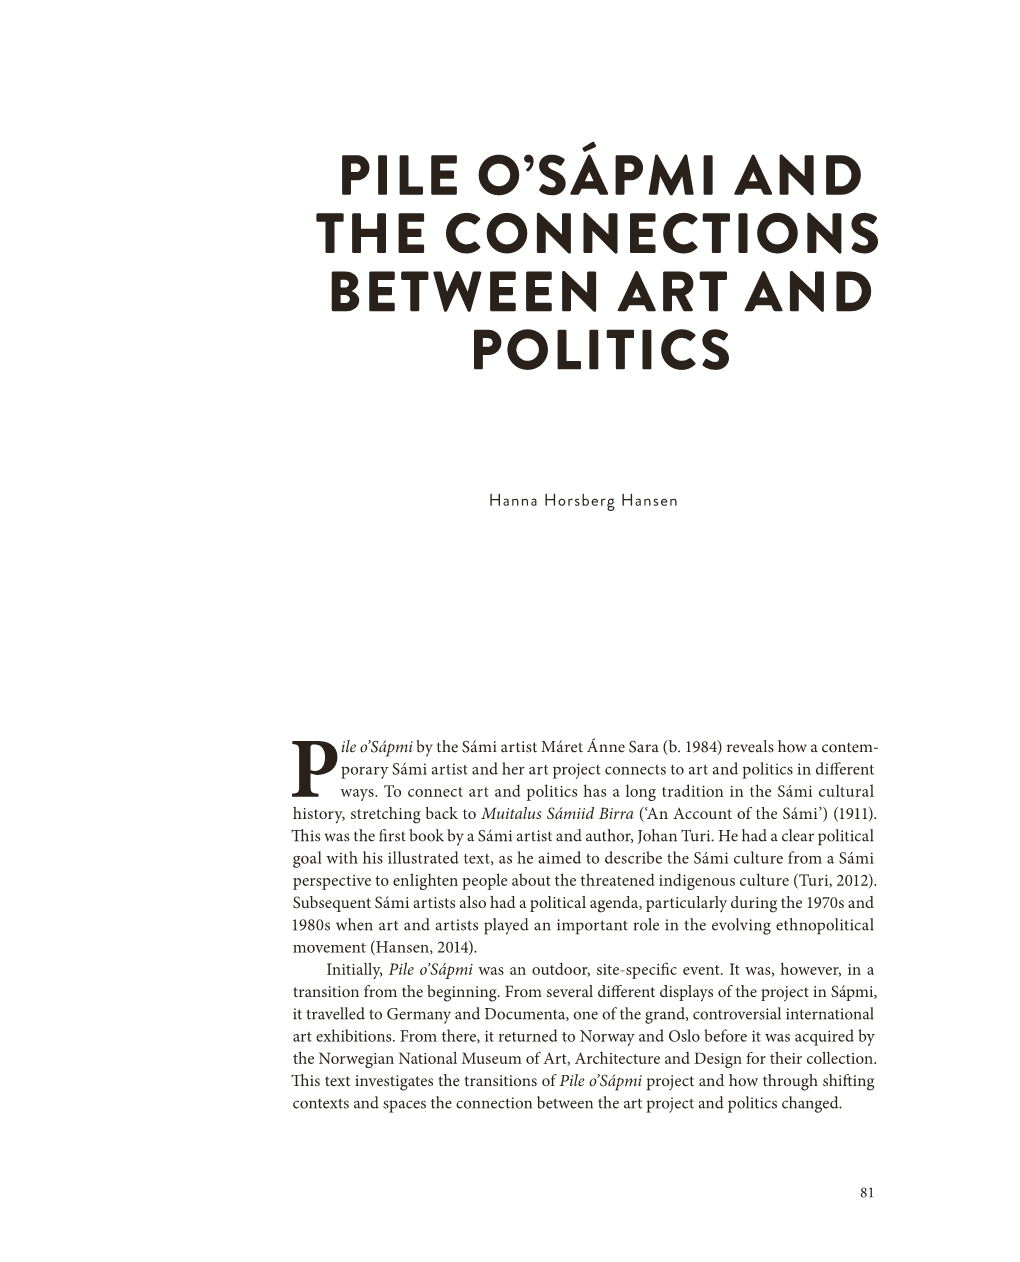 Pile O'sápmi and the Connections Between Art